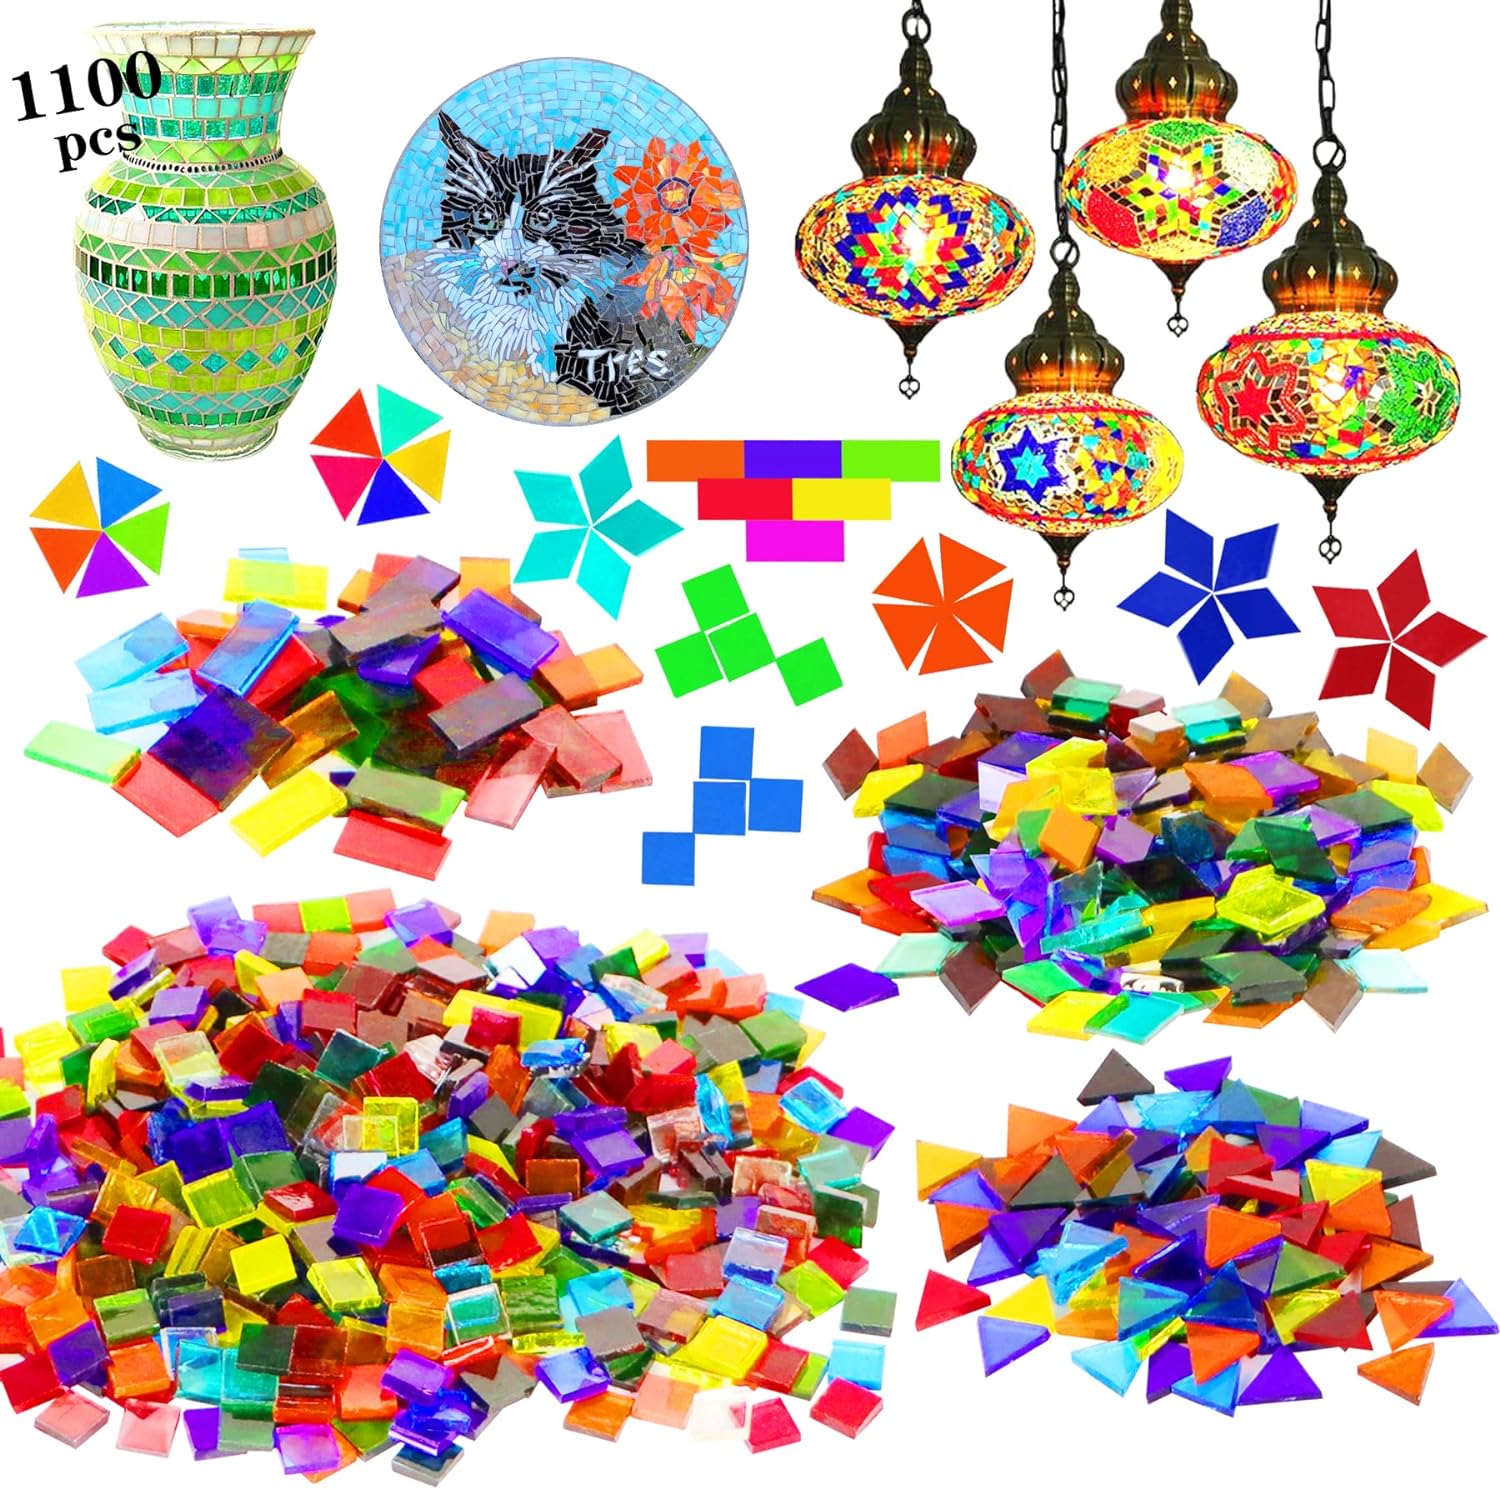 1000 Pieces of Square Mosaic Tiles for Crafts, Textured Stained Glass  Pieces in 40 Assorted Colors for DIY Art Projects, Decorations, Coasters  (0.4 x